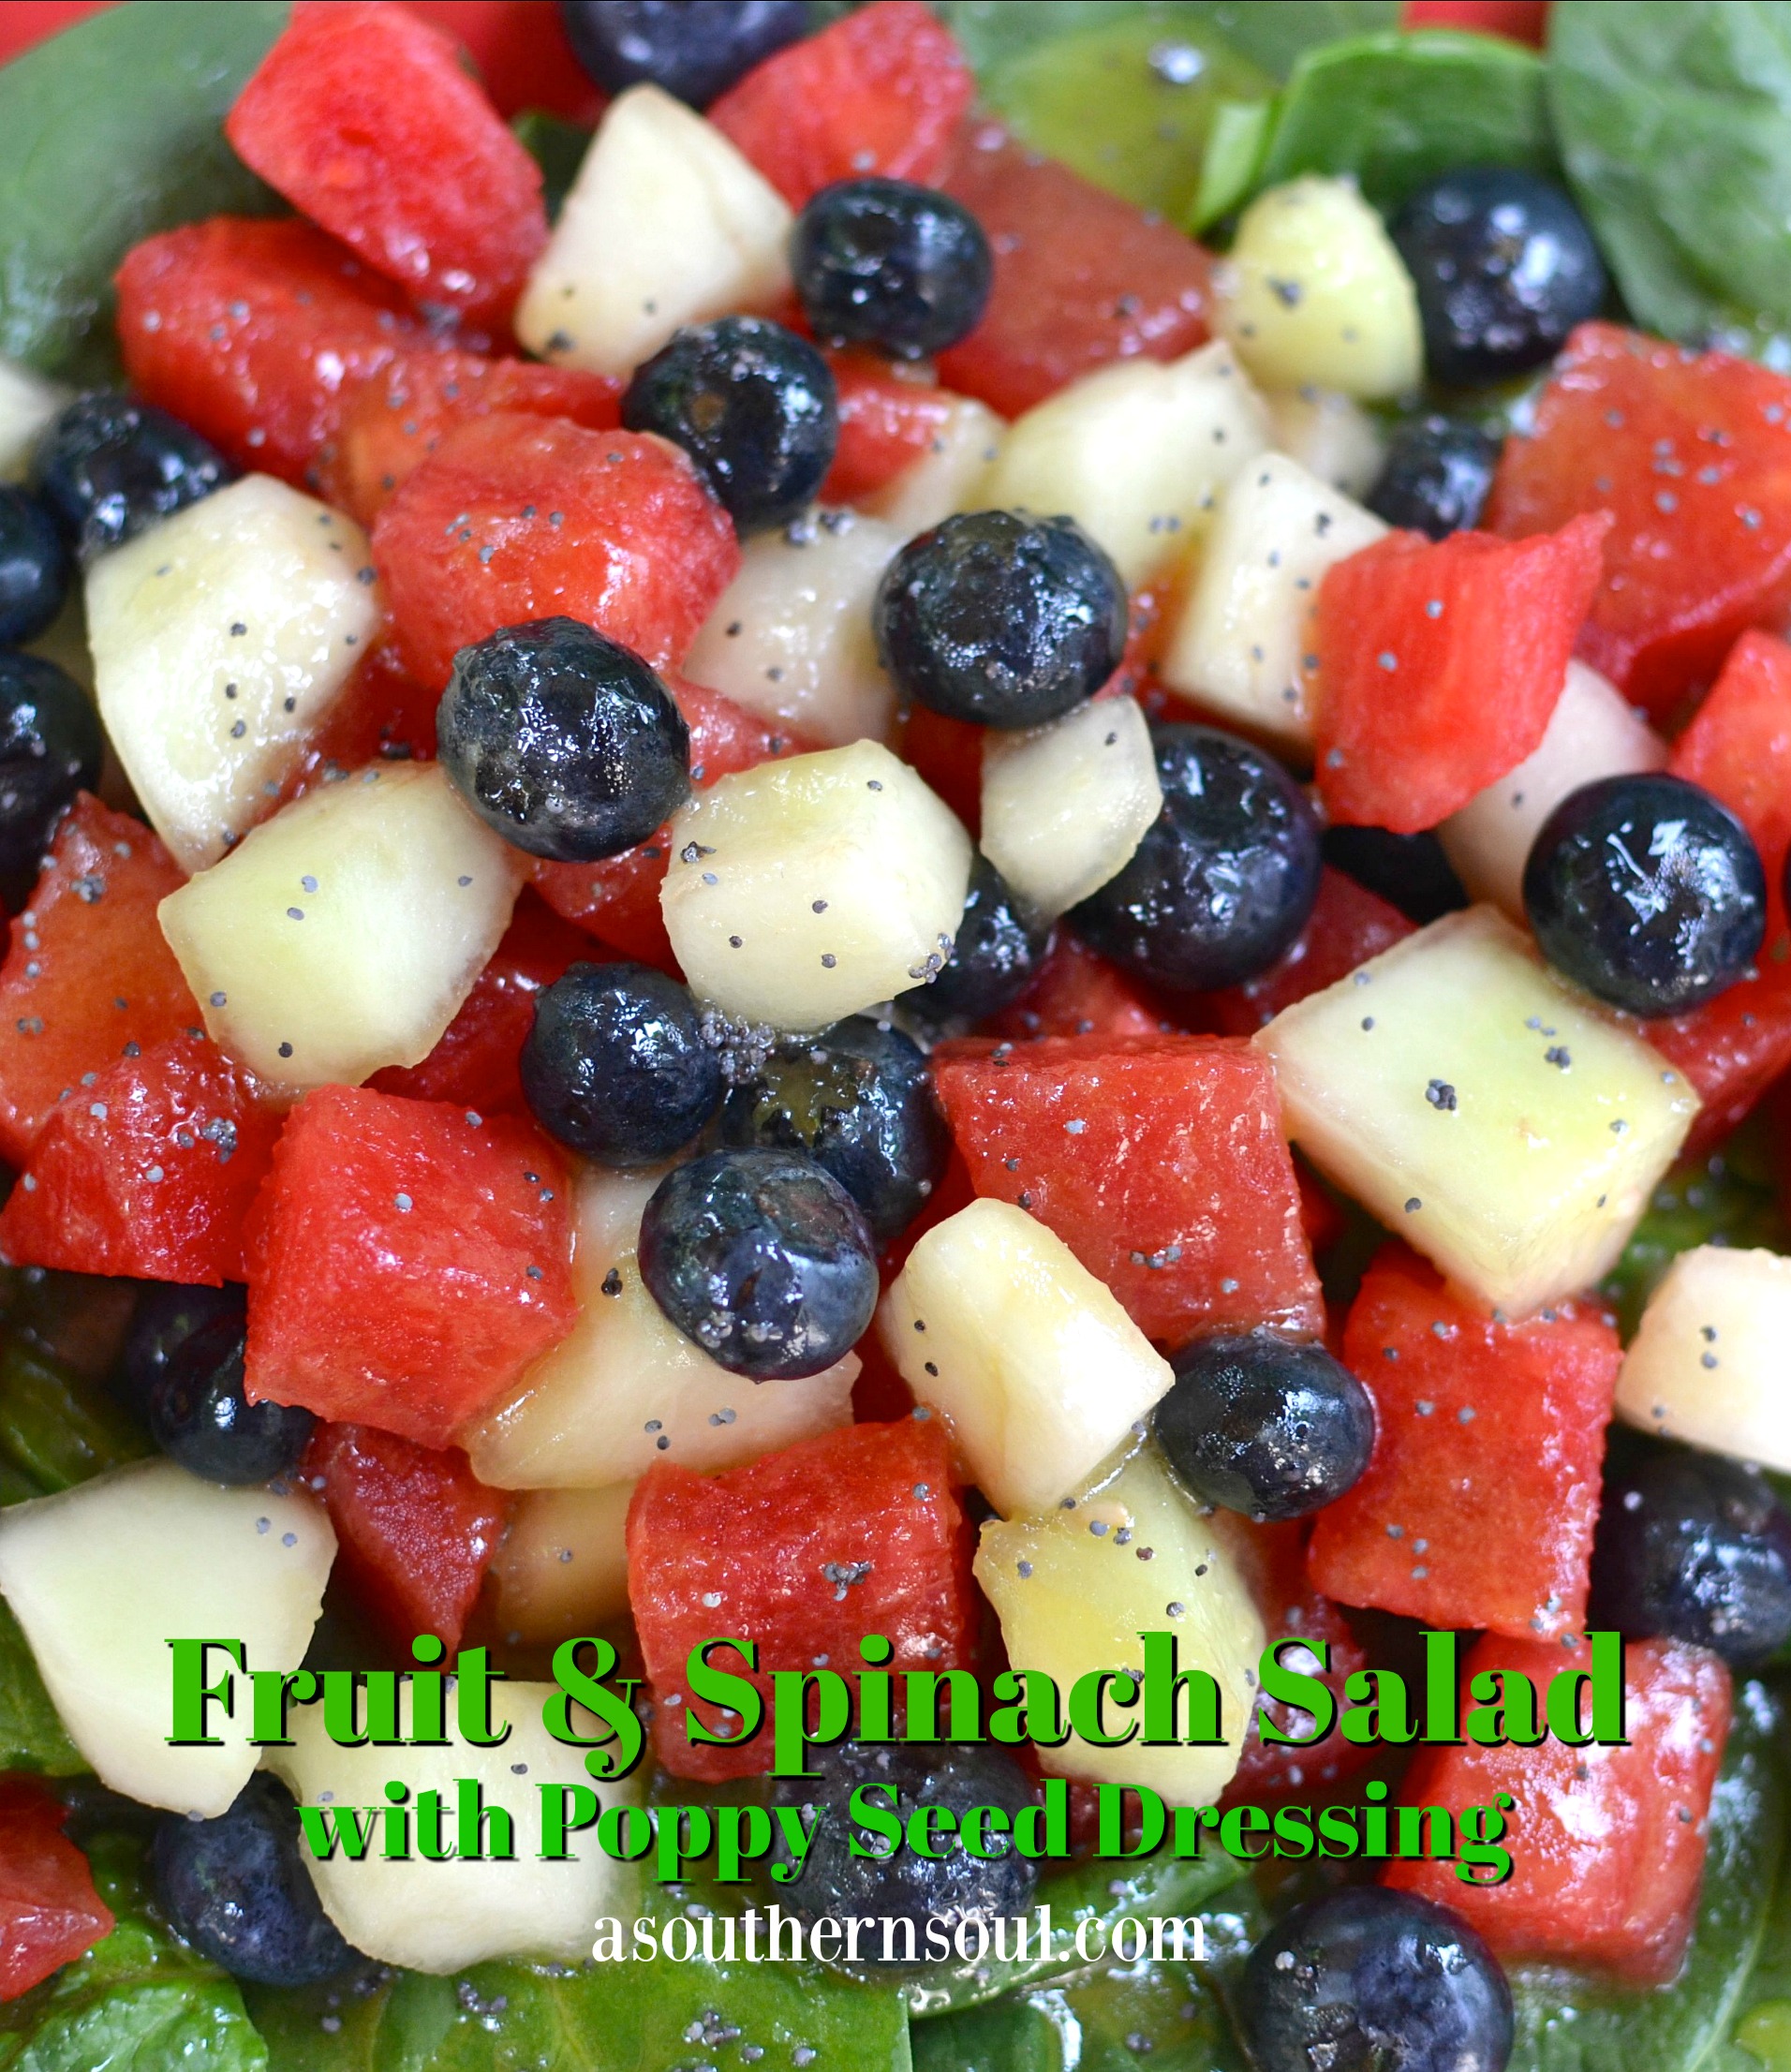 Poppy Seed Dressing Over Fresh Fruit & Spinach - A Southern Soul